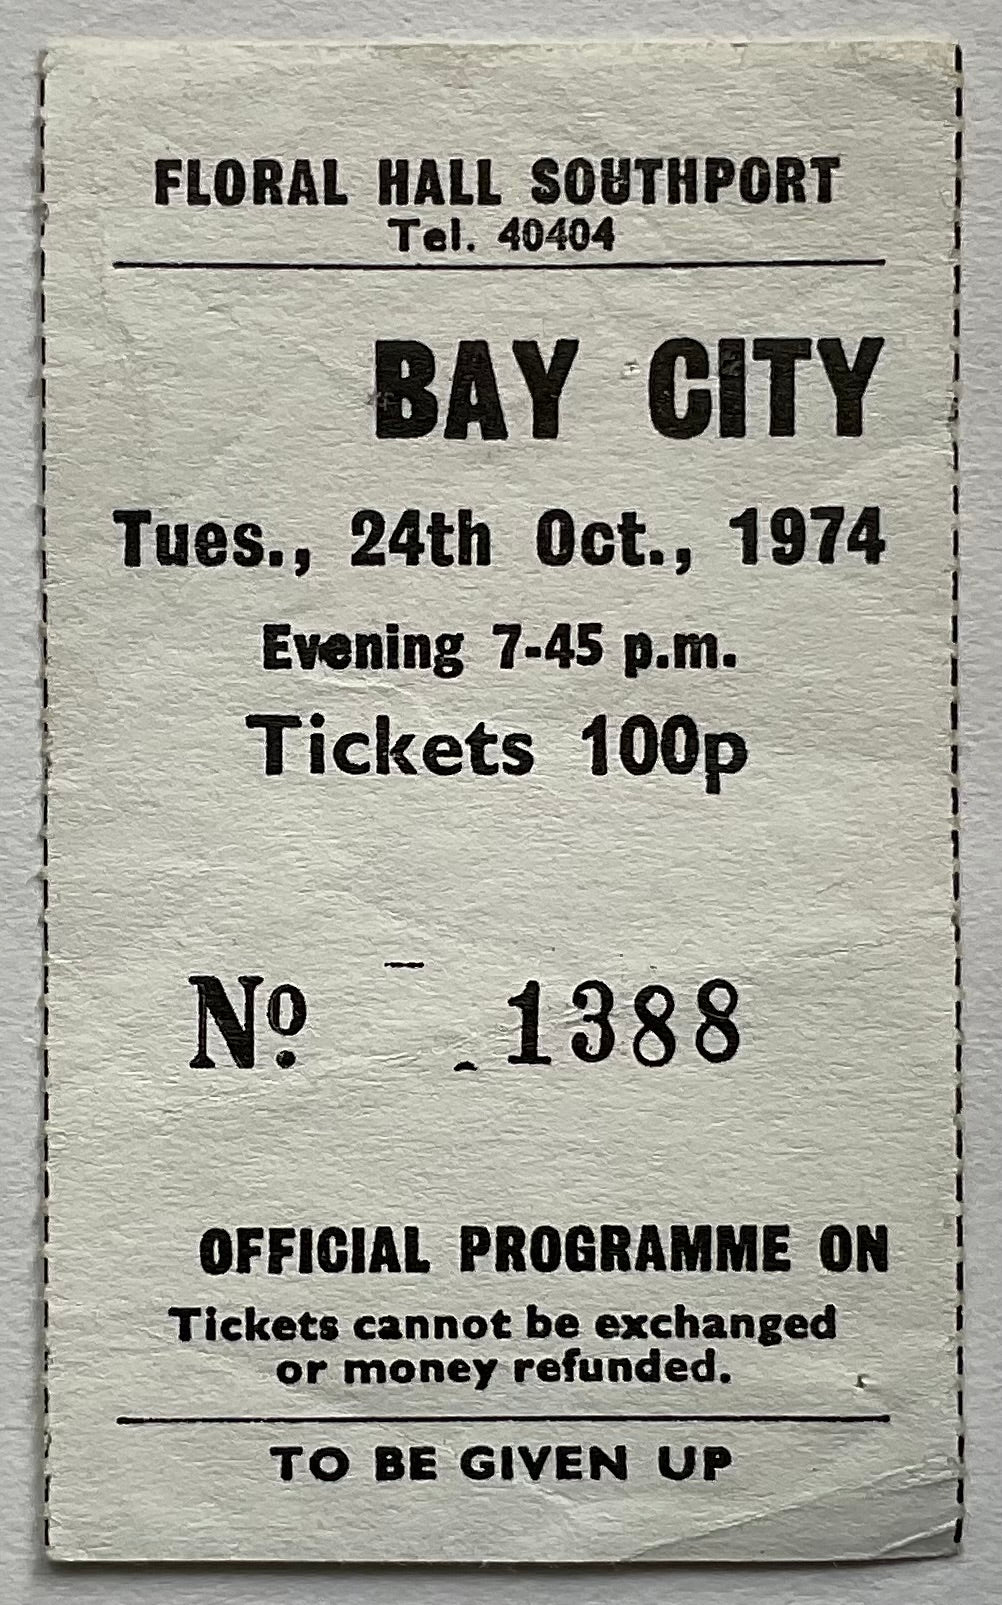 Bay City Rollers Original Used Concert Ticket Floral Hall Southport 24th Oct 1974